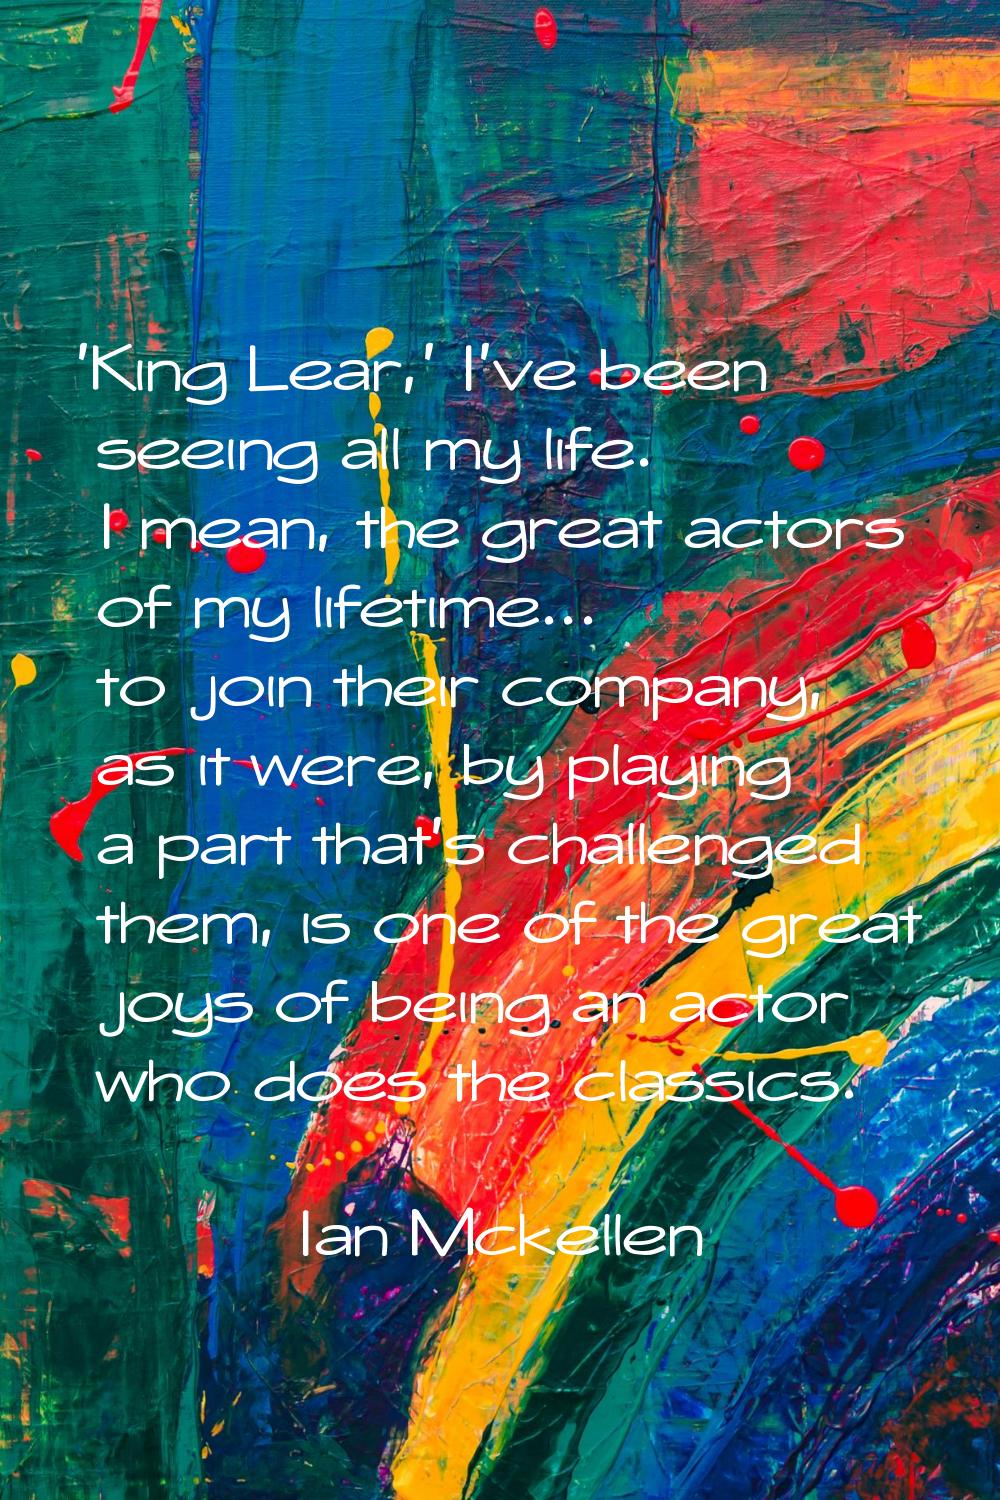 'King Lear,' I've been seeing all my life. I mean, the great actors of my lifetime... to join their